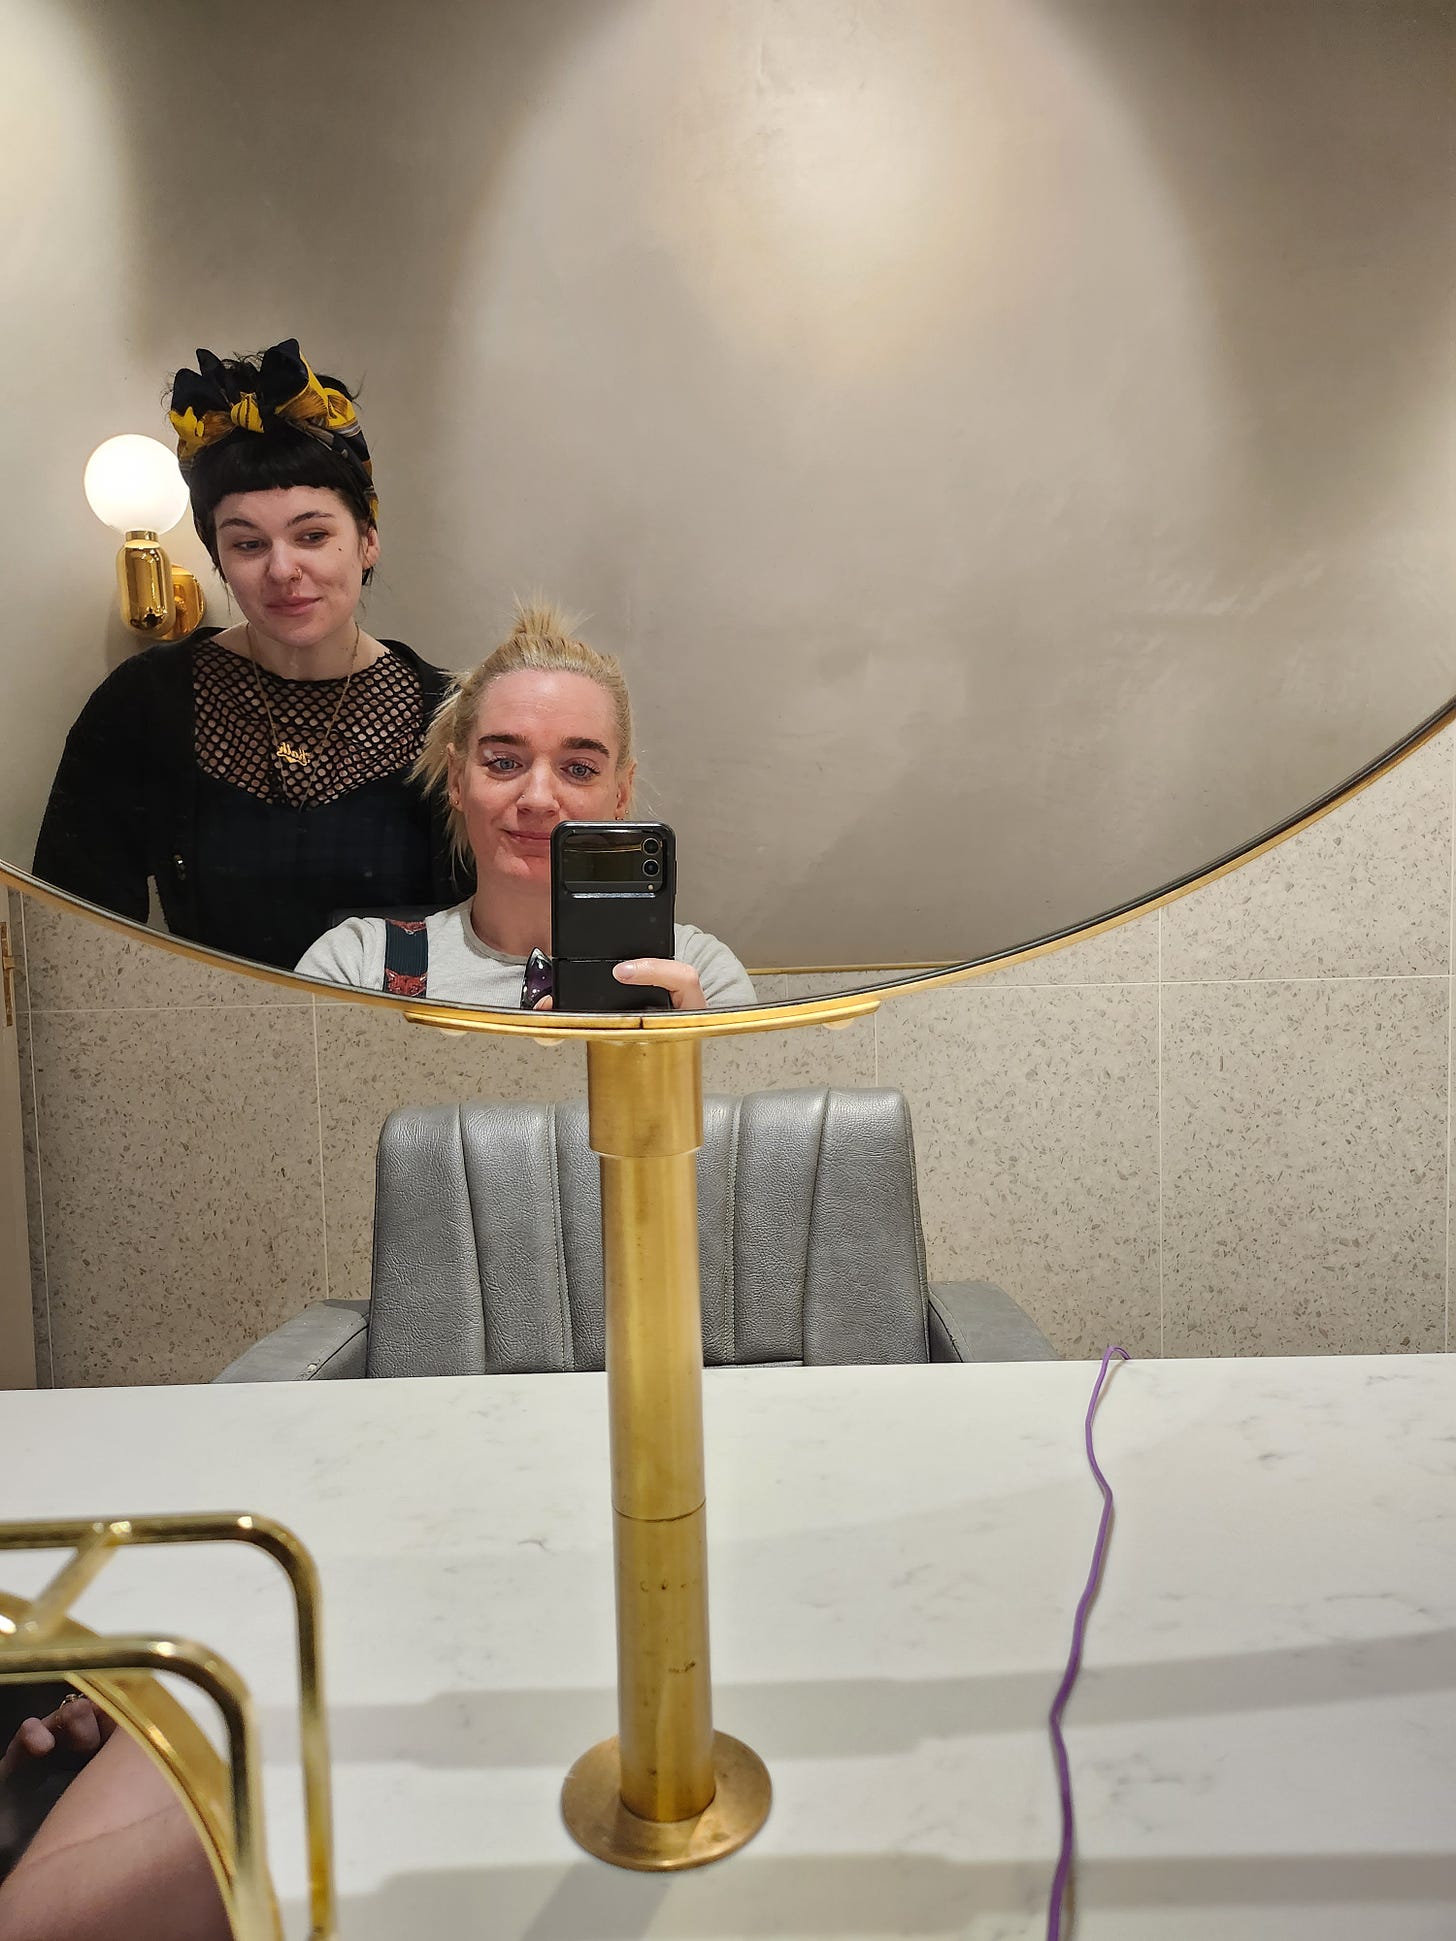 A mirror selfie with Kath. My brows freshly threaded, tinted and shaped. 